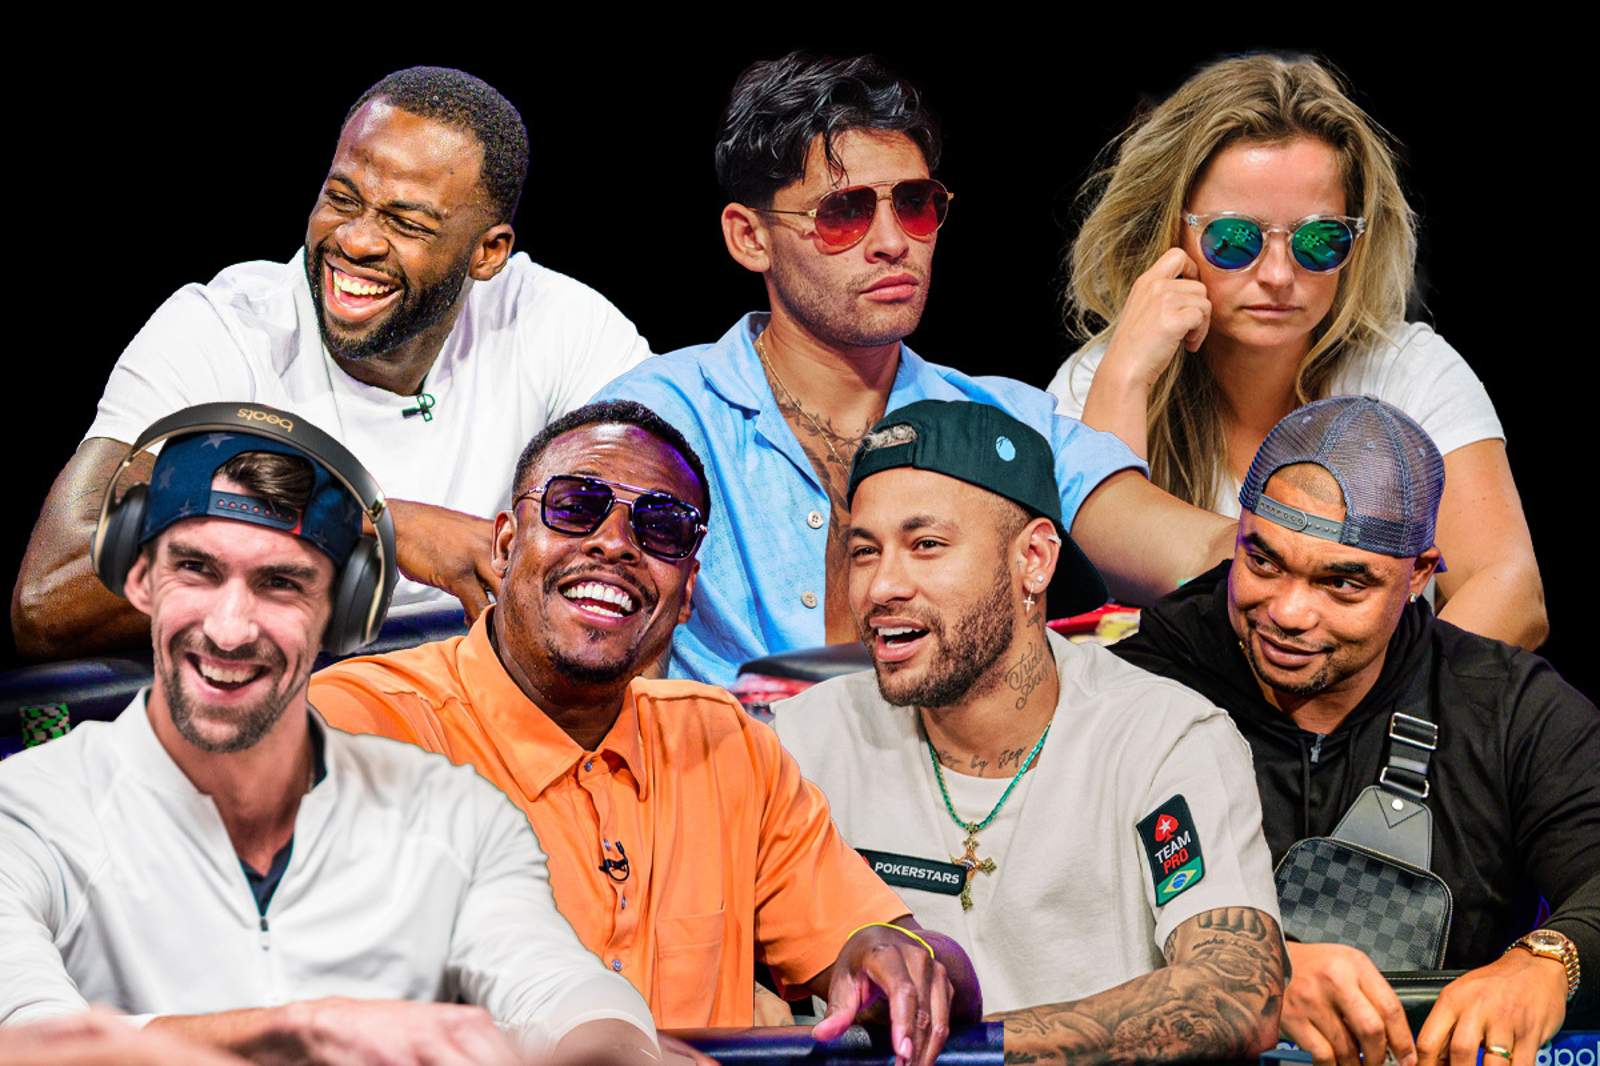 The Definitive List of Athletes Who Play Poker